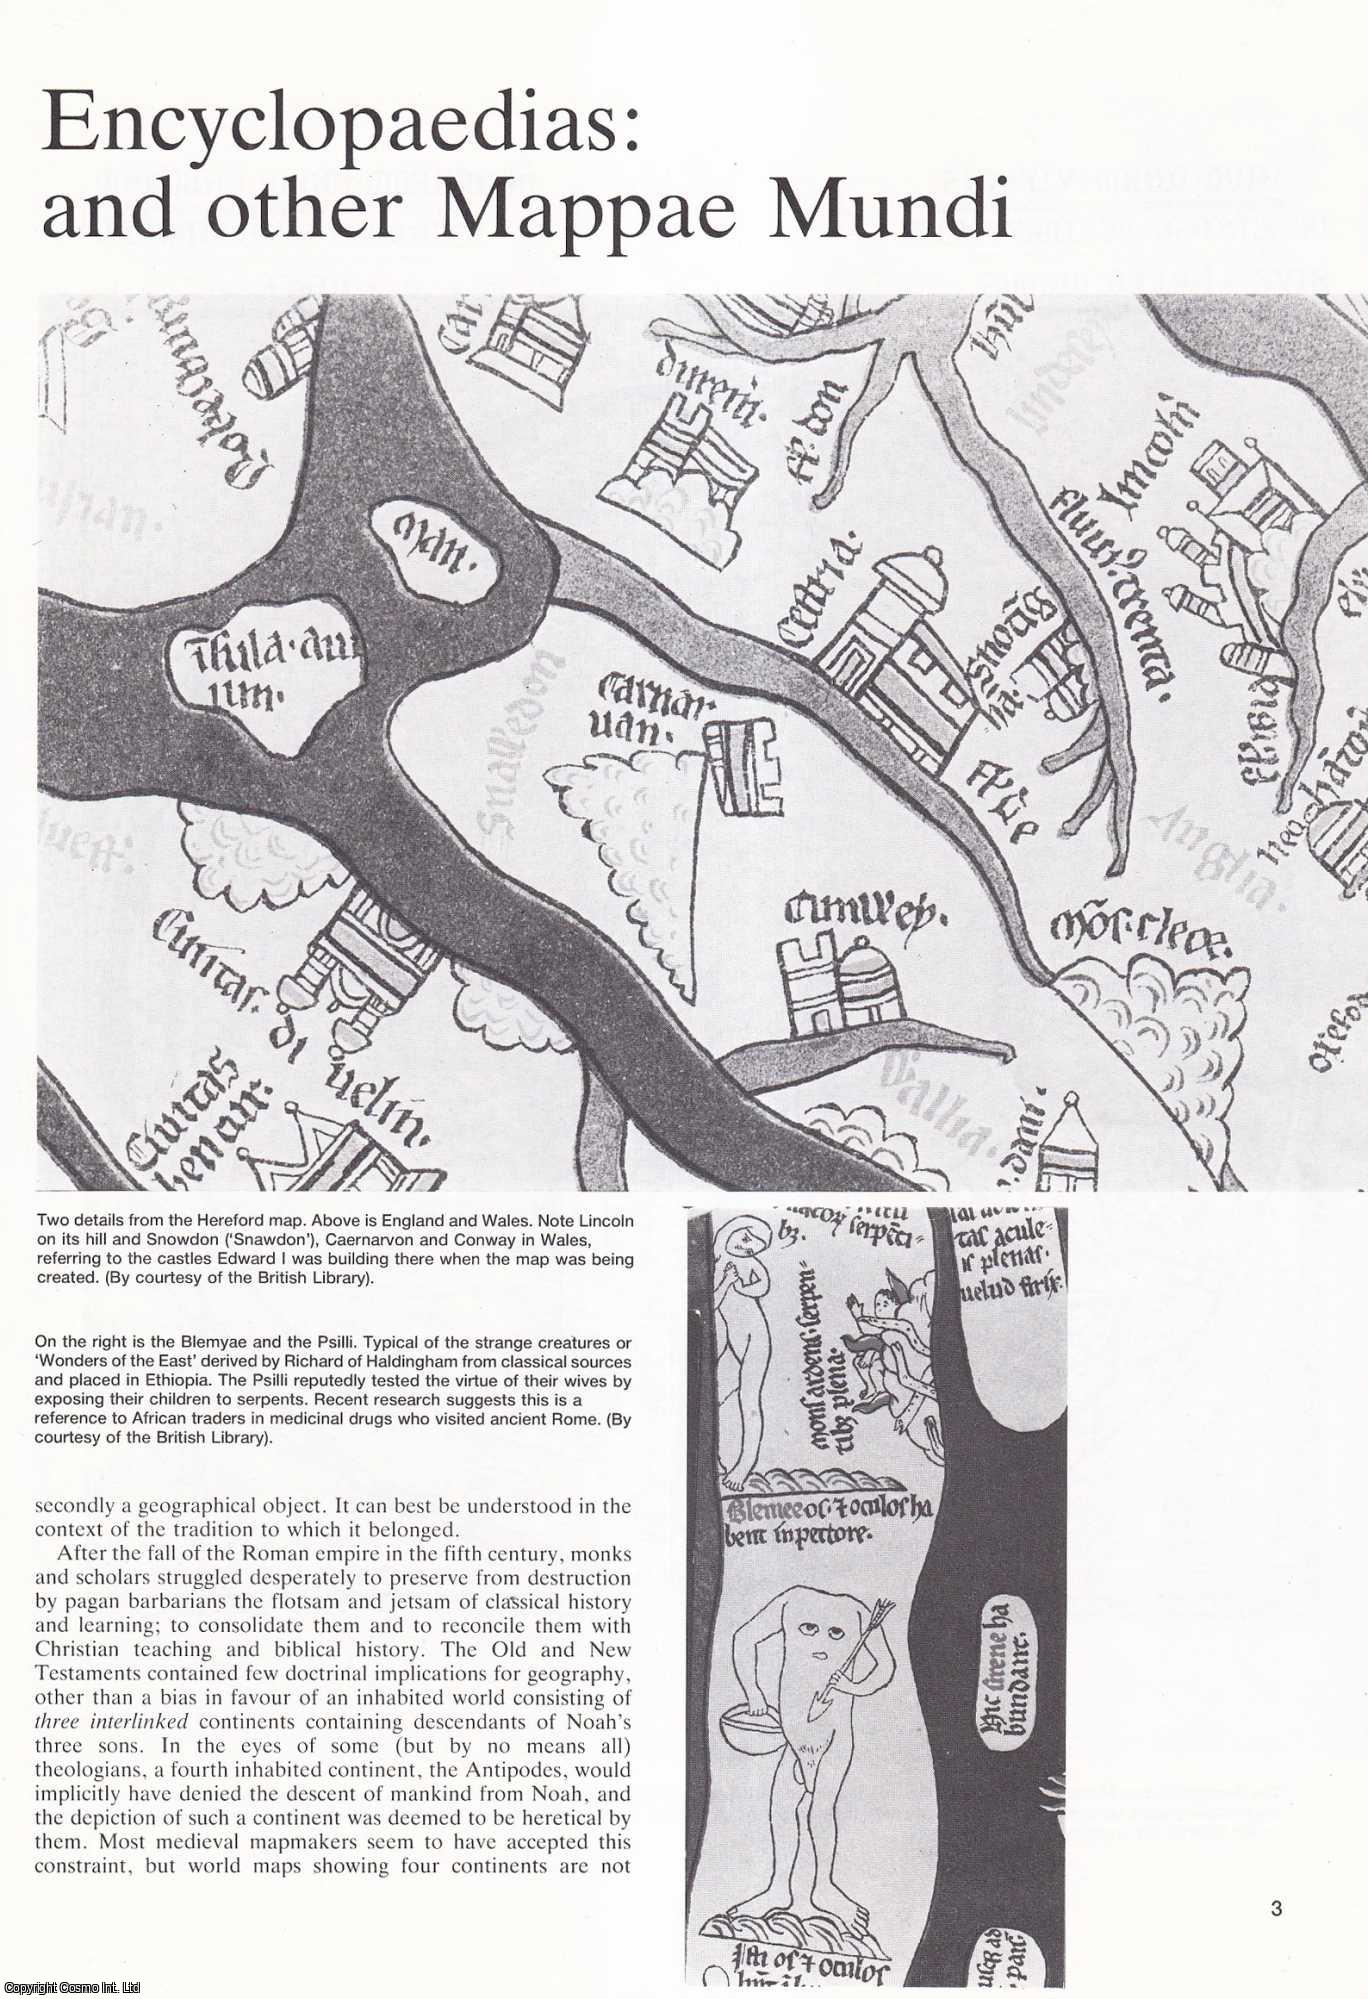 Peter Barber - Visual Encyclopaedias: The Hereford and other Mappae Mundi. An original article from Map Collector Magazine, 1989.